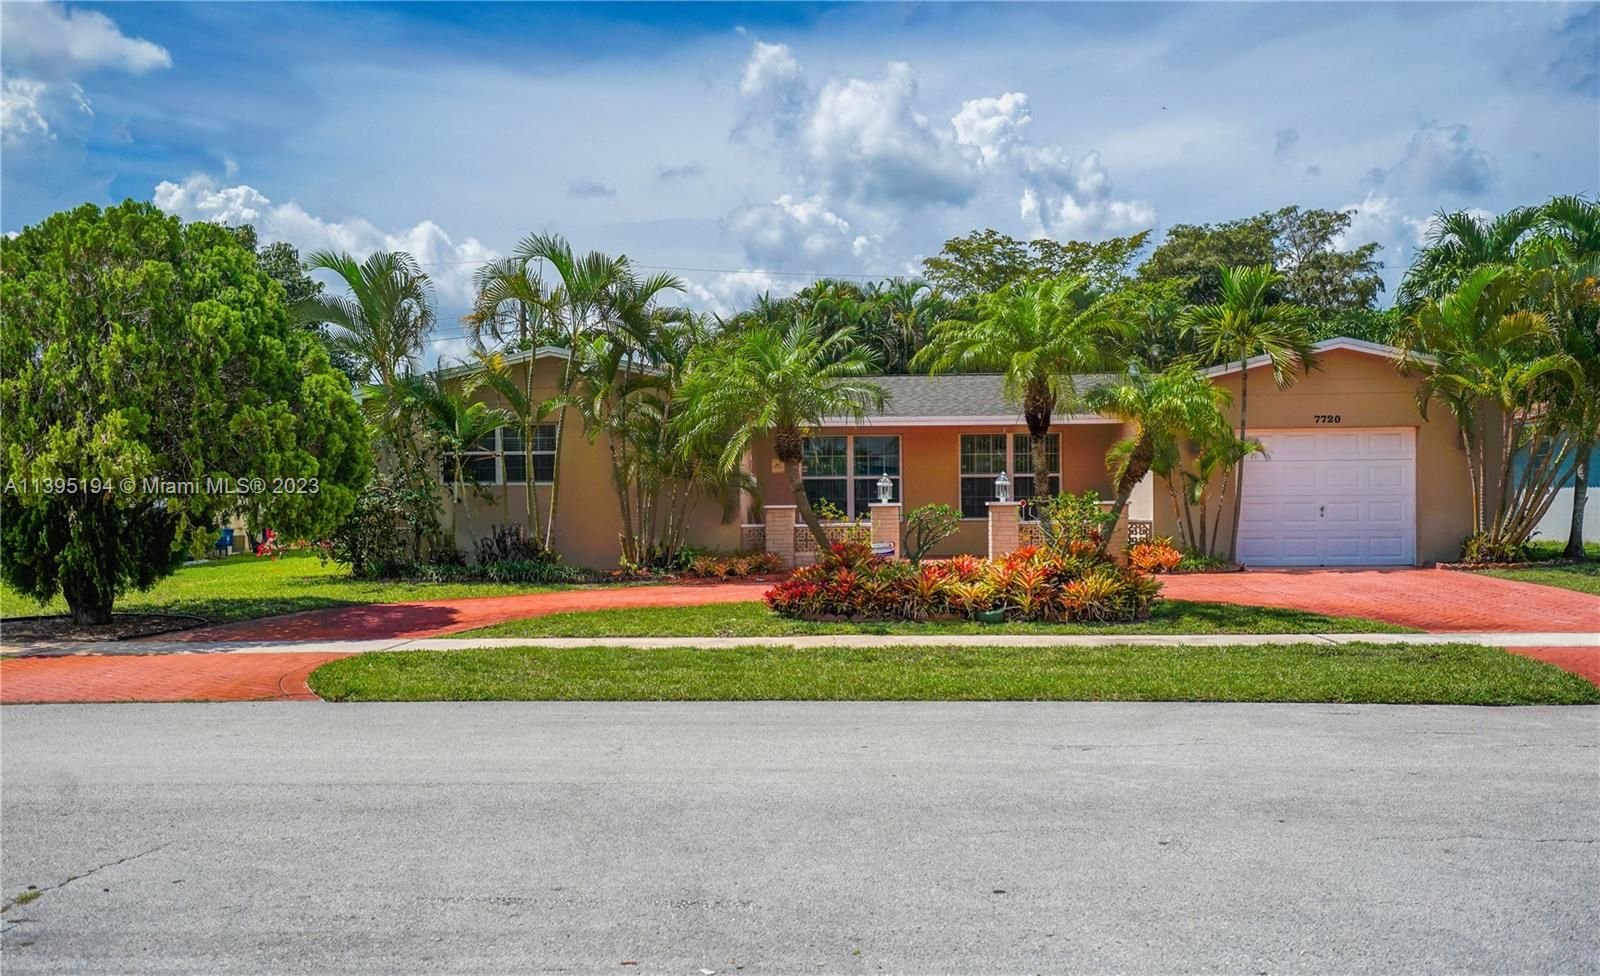 Real estate property located at 7720 6th St, Broward County, Pembroke Pines, FL